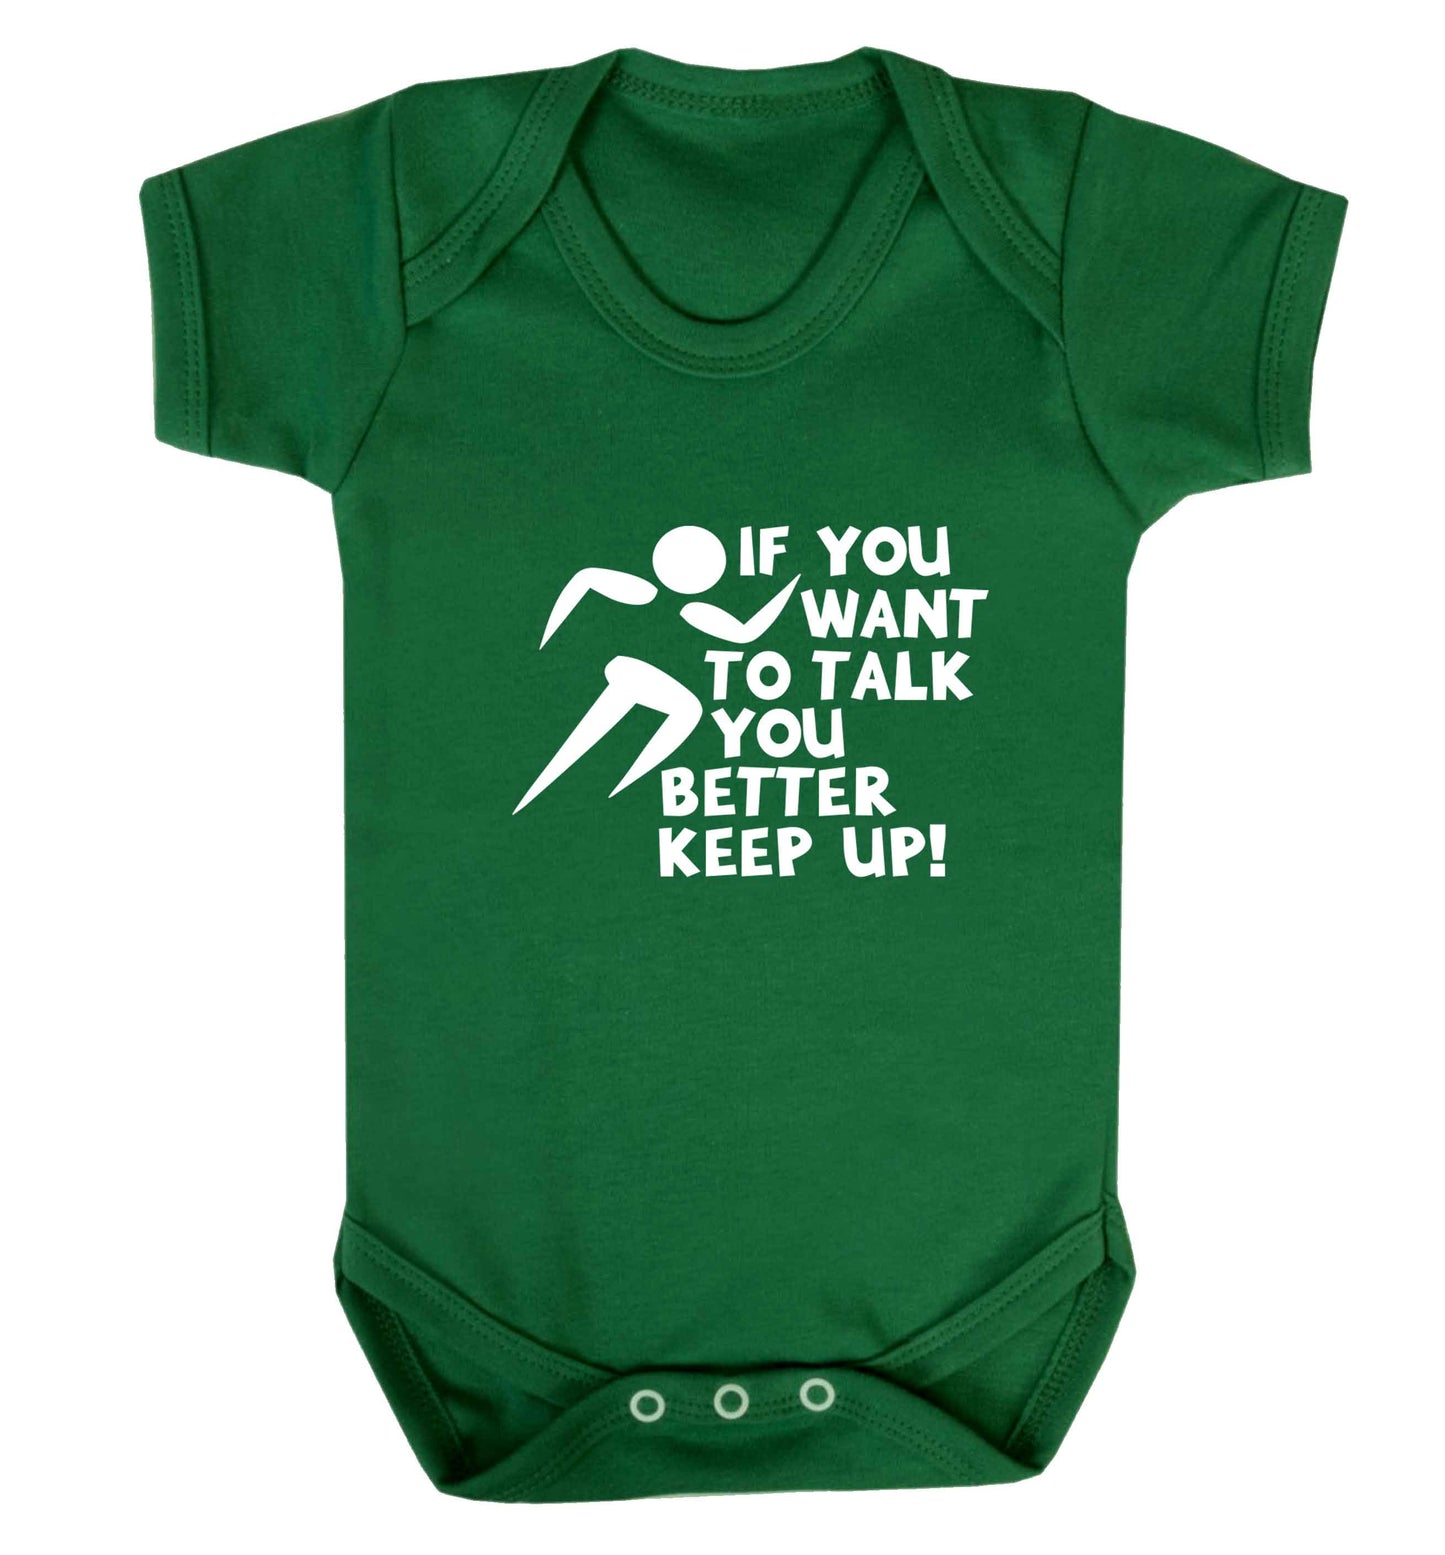 If you want to talk you better keep up! baby vest green 18-24 months